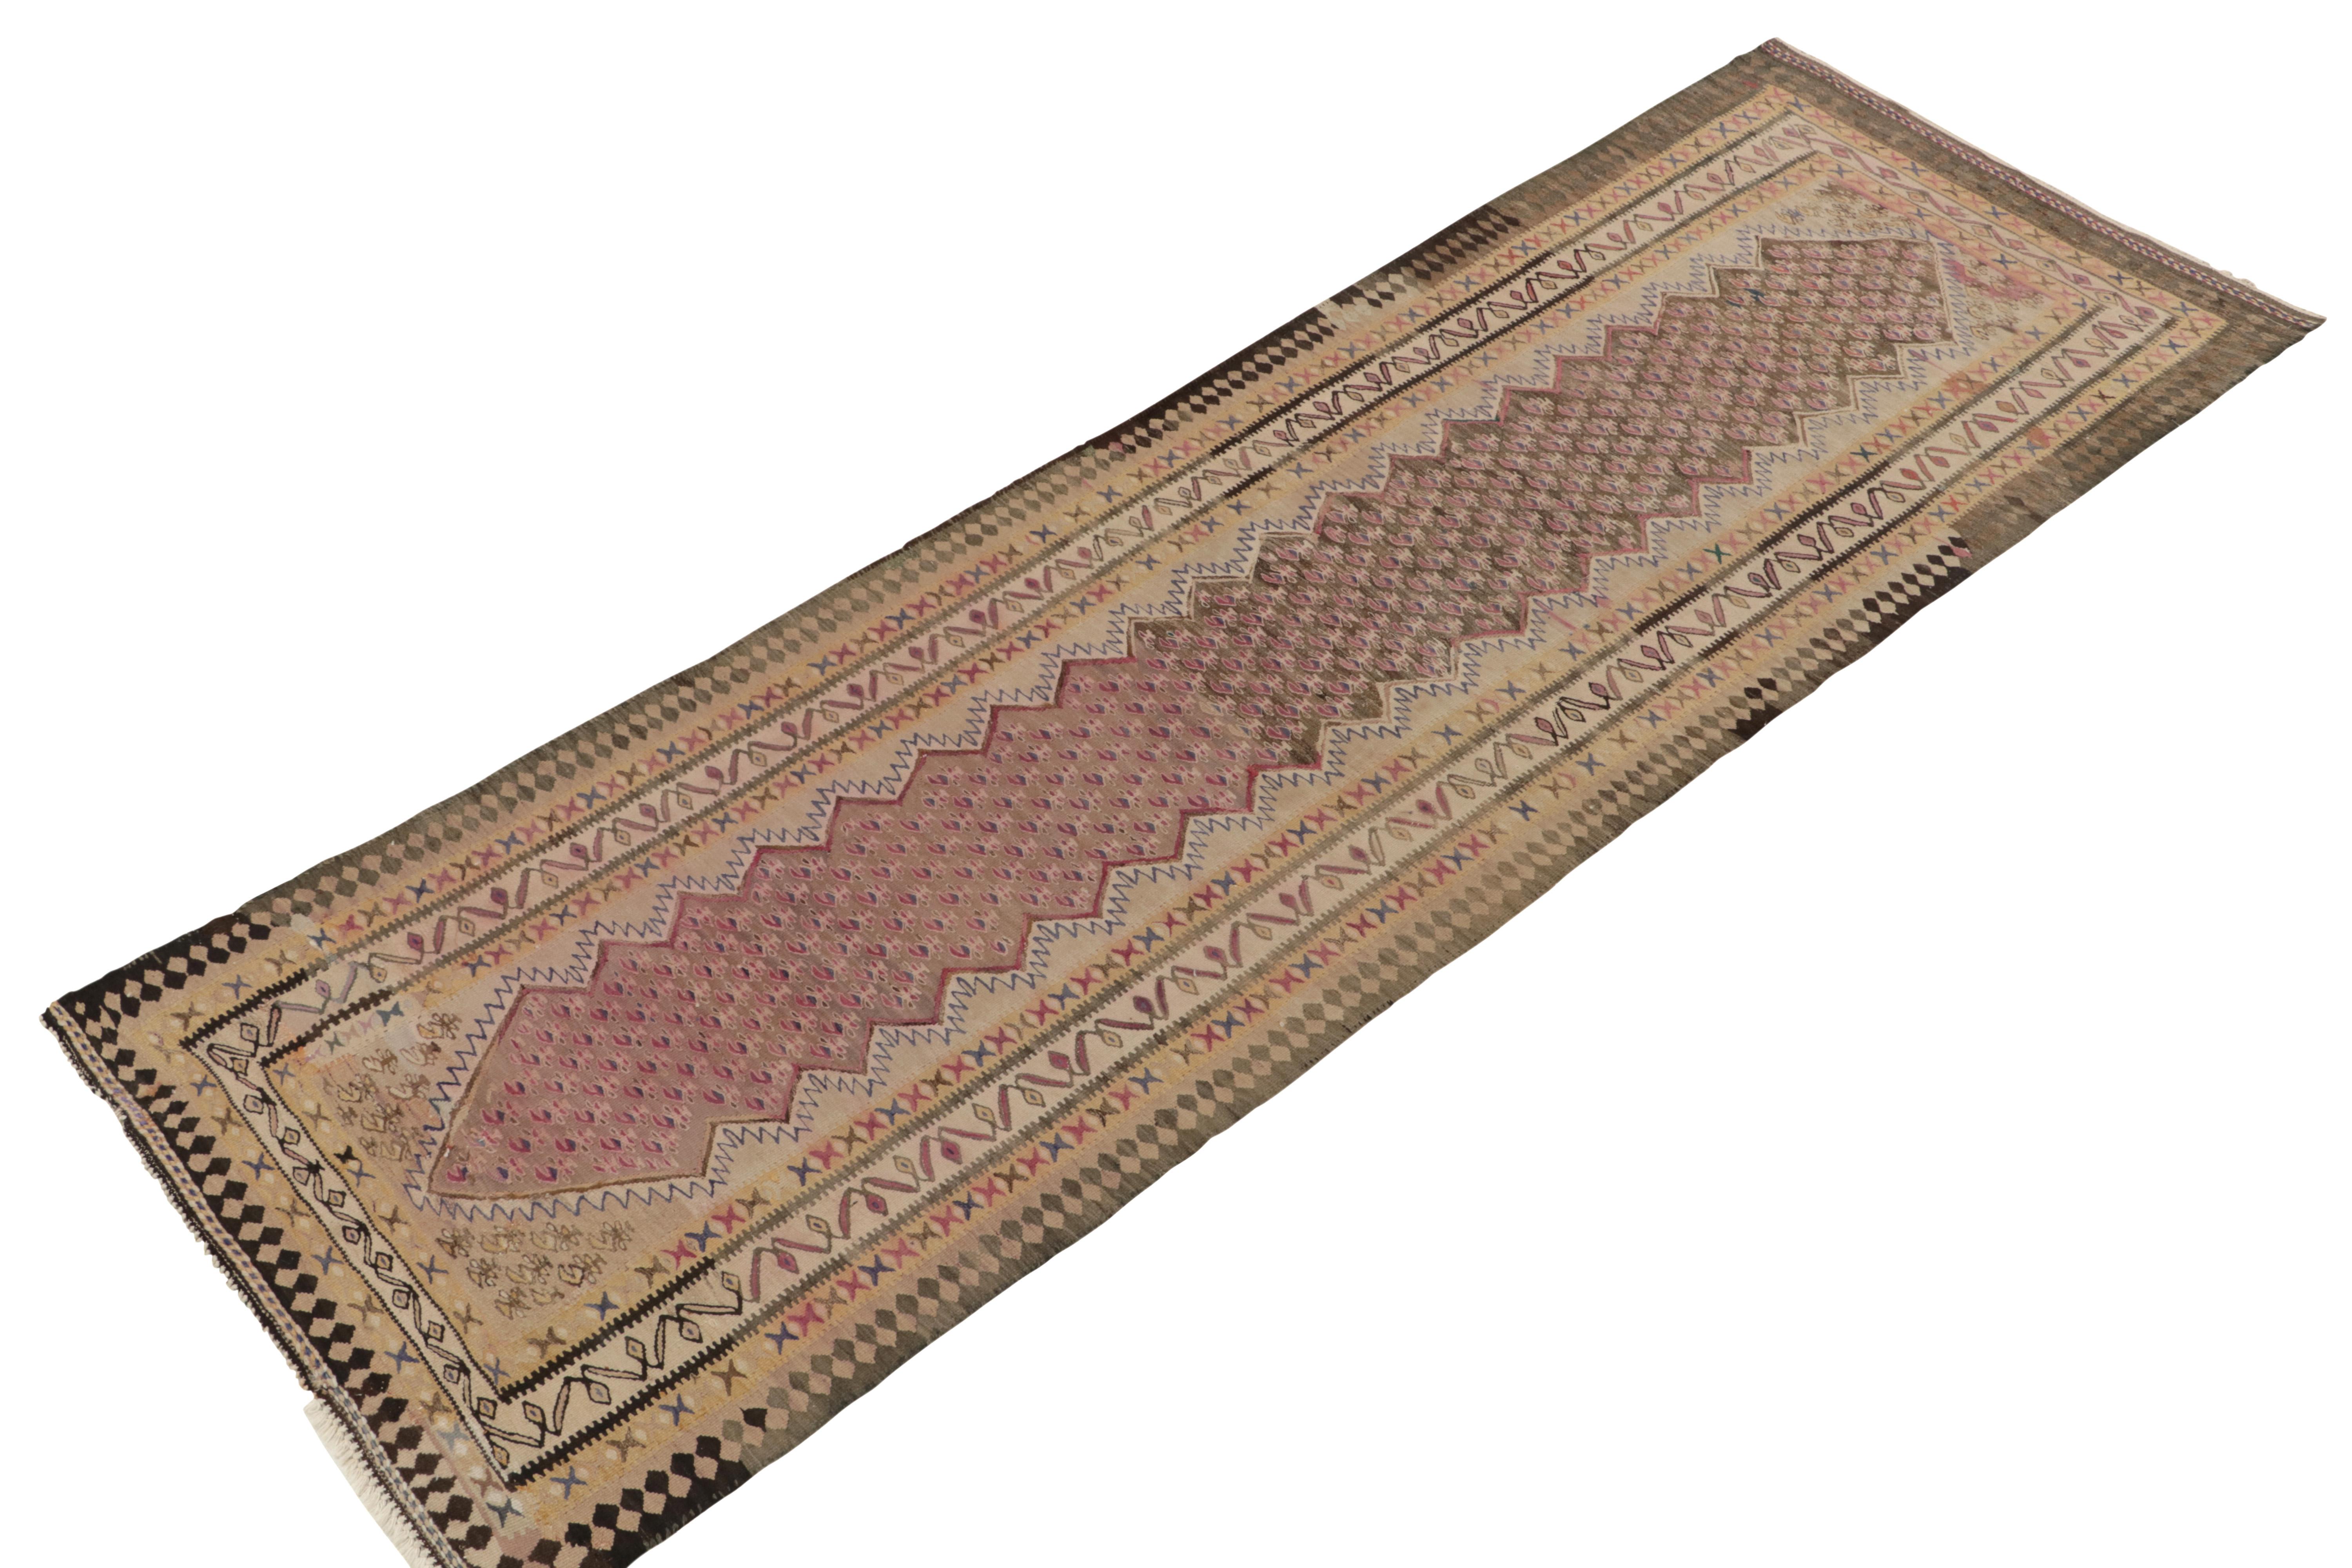 Handwoven in wool circa 1950-1960, a 4x10 vintage Senneh kilim runner newly unveiled from Rug & Kilim’s most distinguished tribal curations. 

This particular Persian rug enjoys an elaborate pattern in unusual pink and pale indigo blue geometry